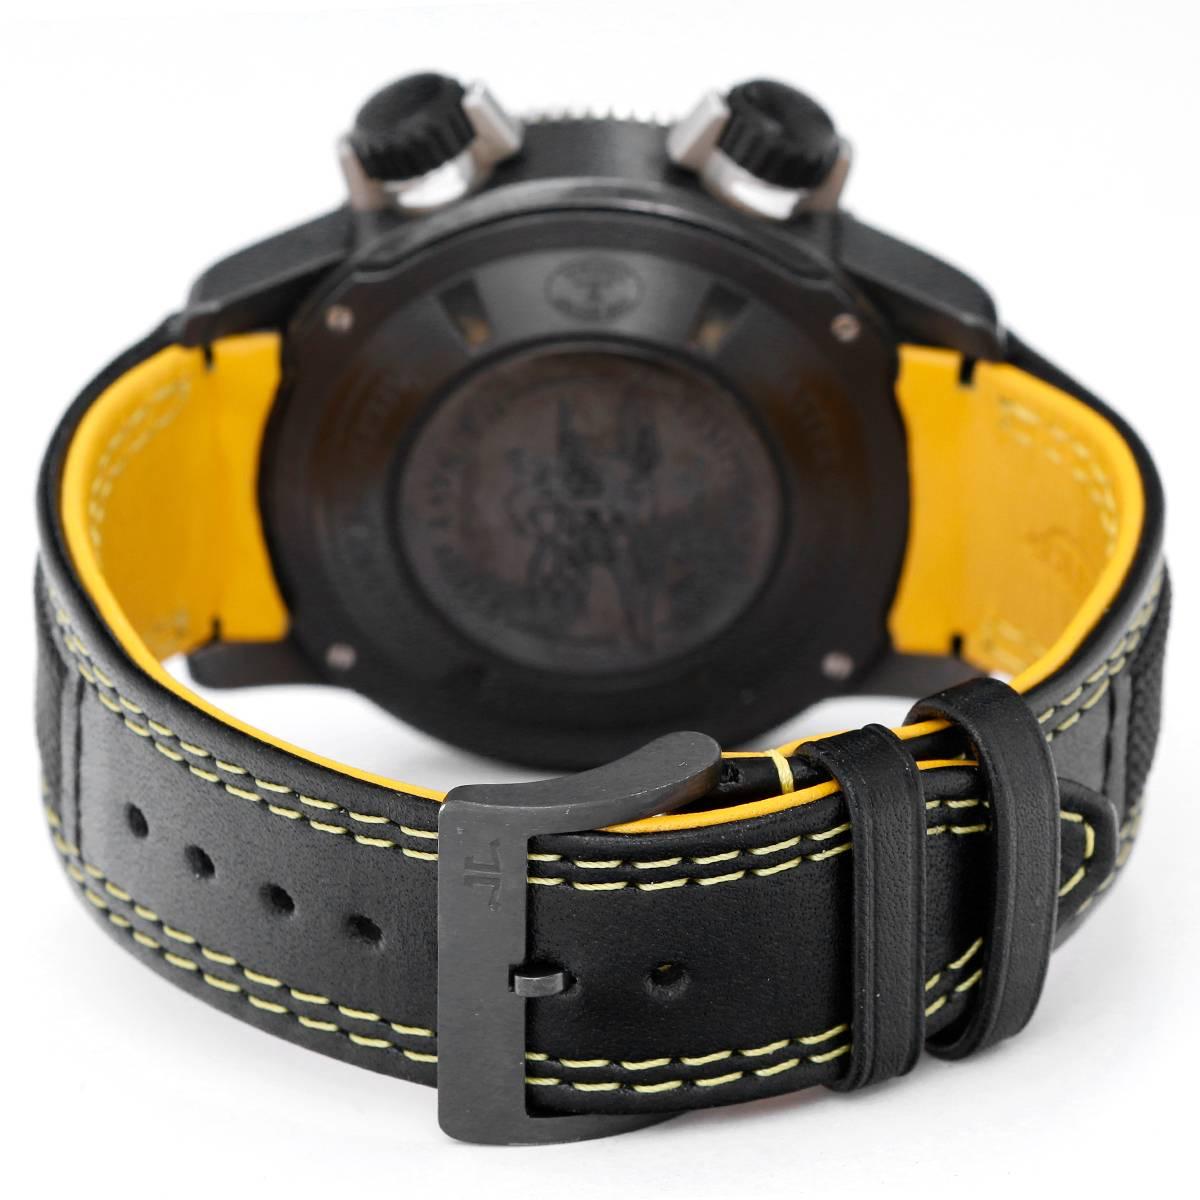 Jaeger-LeCoultre Master Compressor Diving Alarm Navy Seals Limited Edtn Watch -  Automatic winding with date, alarm. Titanium case with PVD coating (44mm). Black dial with Arabic numerals with yellow highlights.  Gray center.. Strap band with